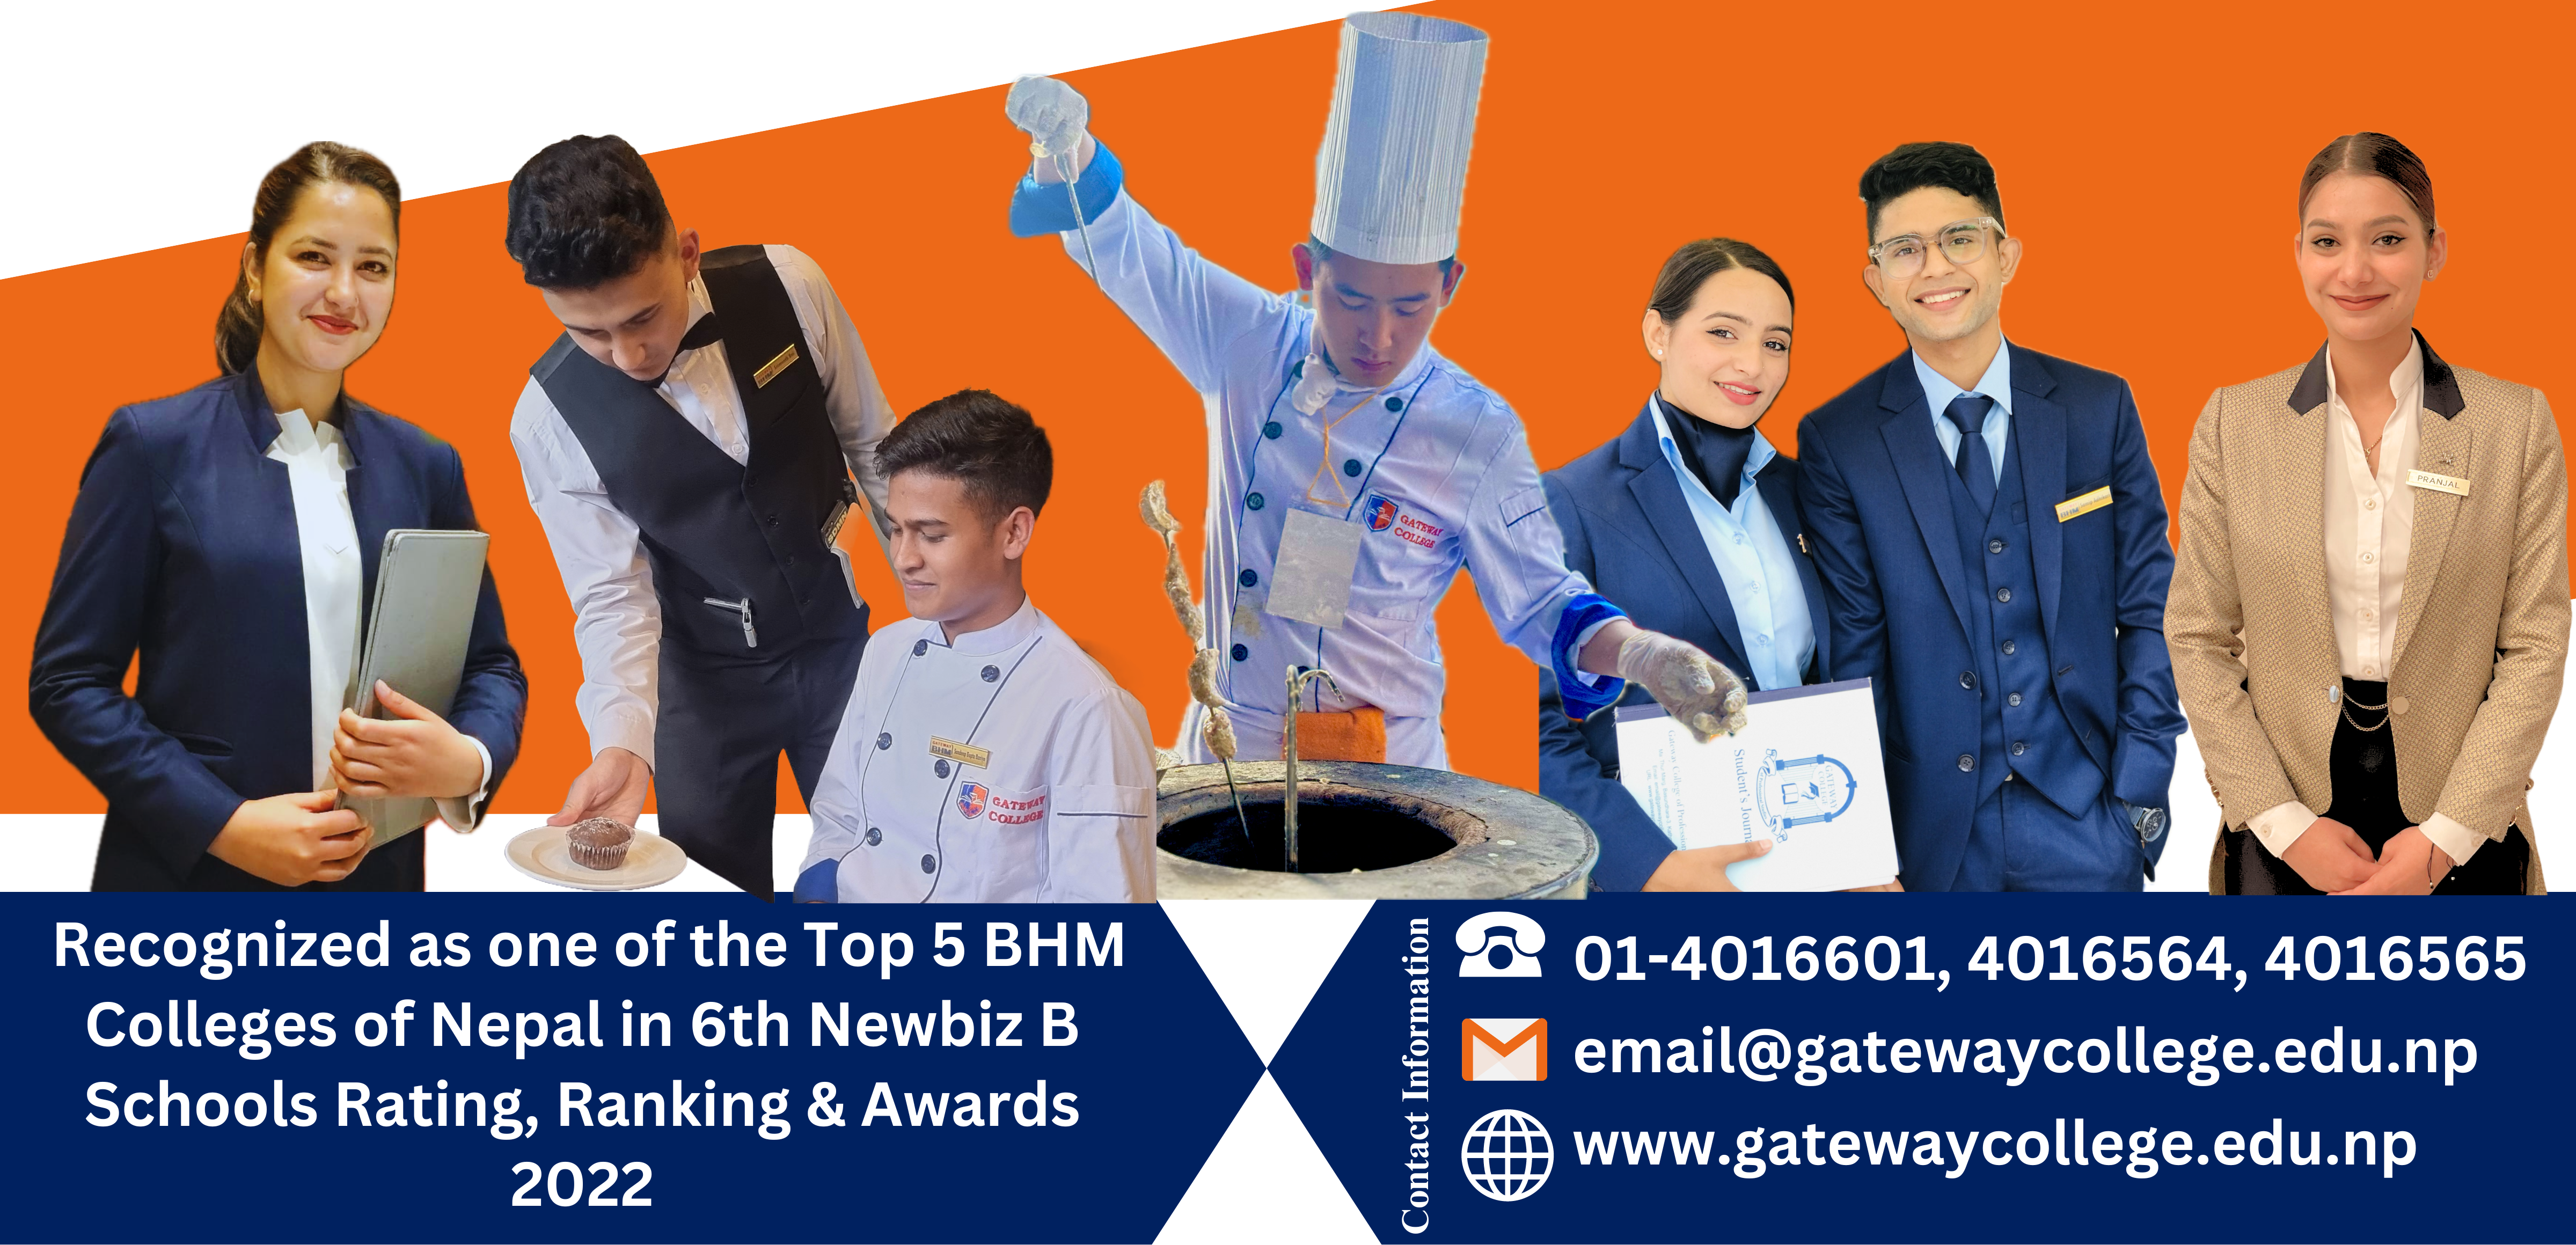 Gateway College is one of the top 5 Hotel Management (BHM) Colleges in Nepal